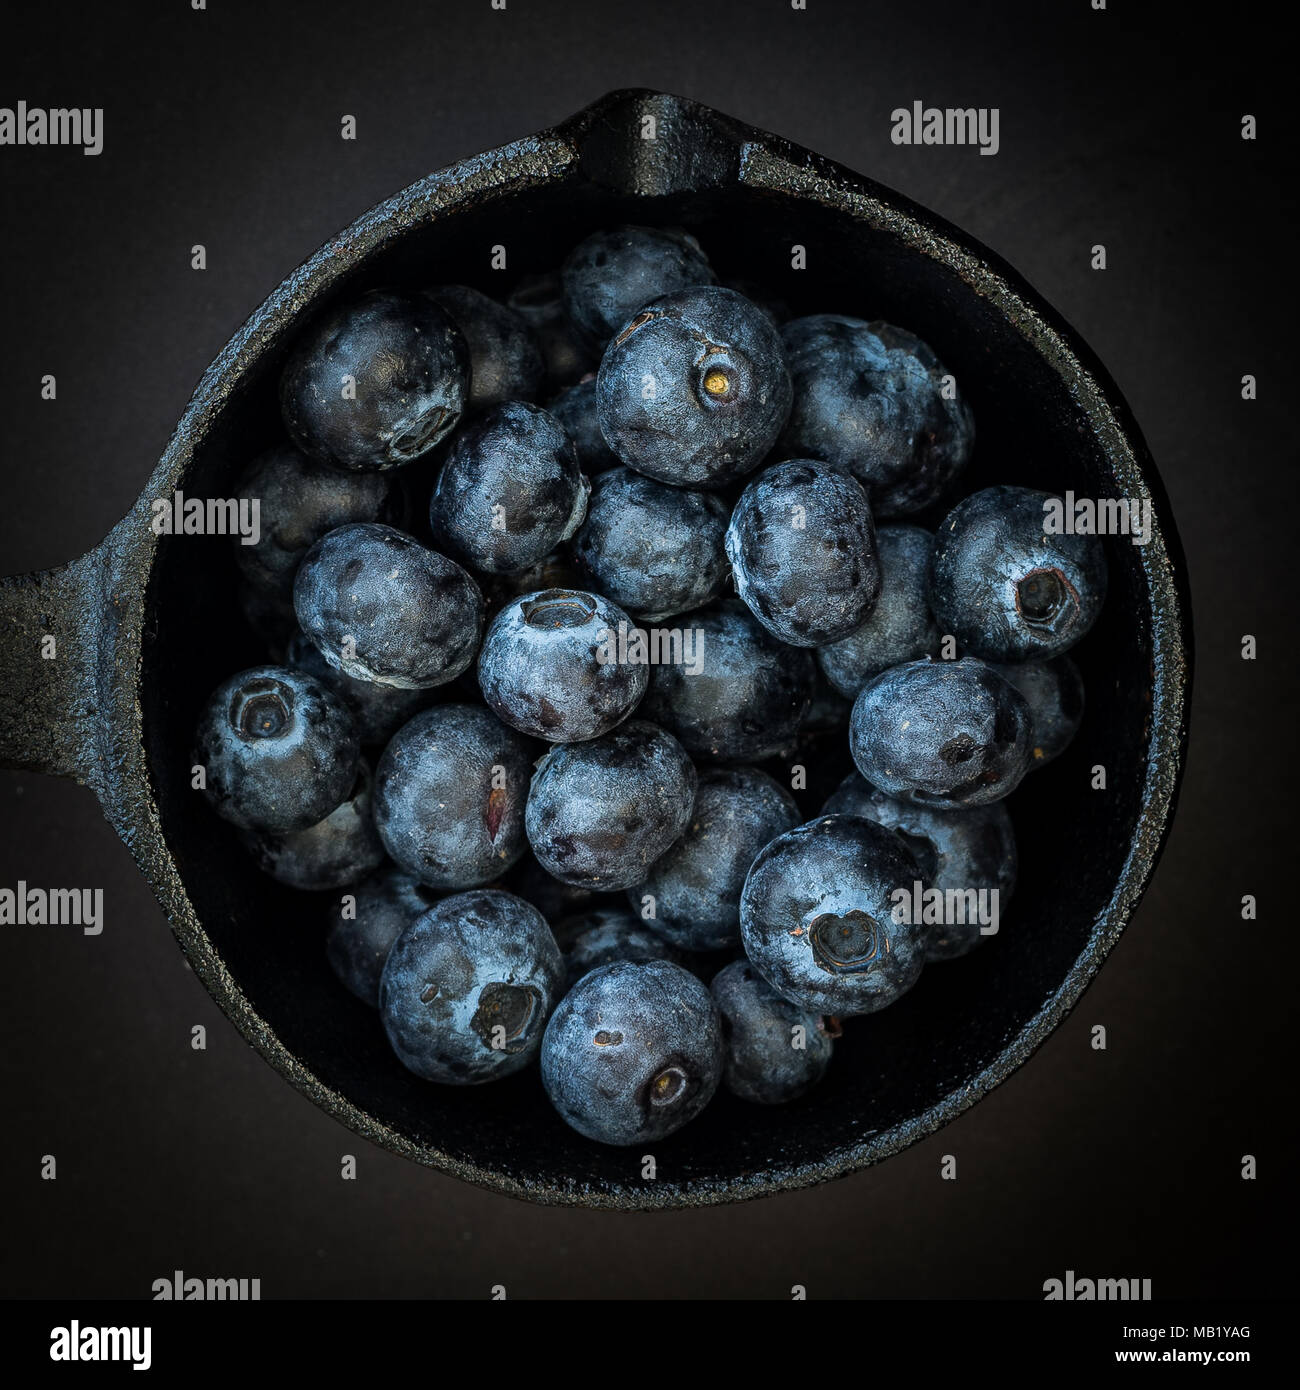 Blueberries shot overhead, in a dark food style with vignette Stock Photo